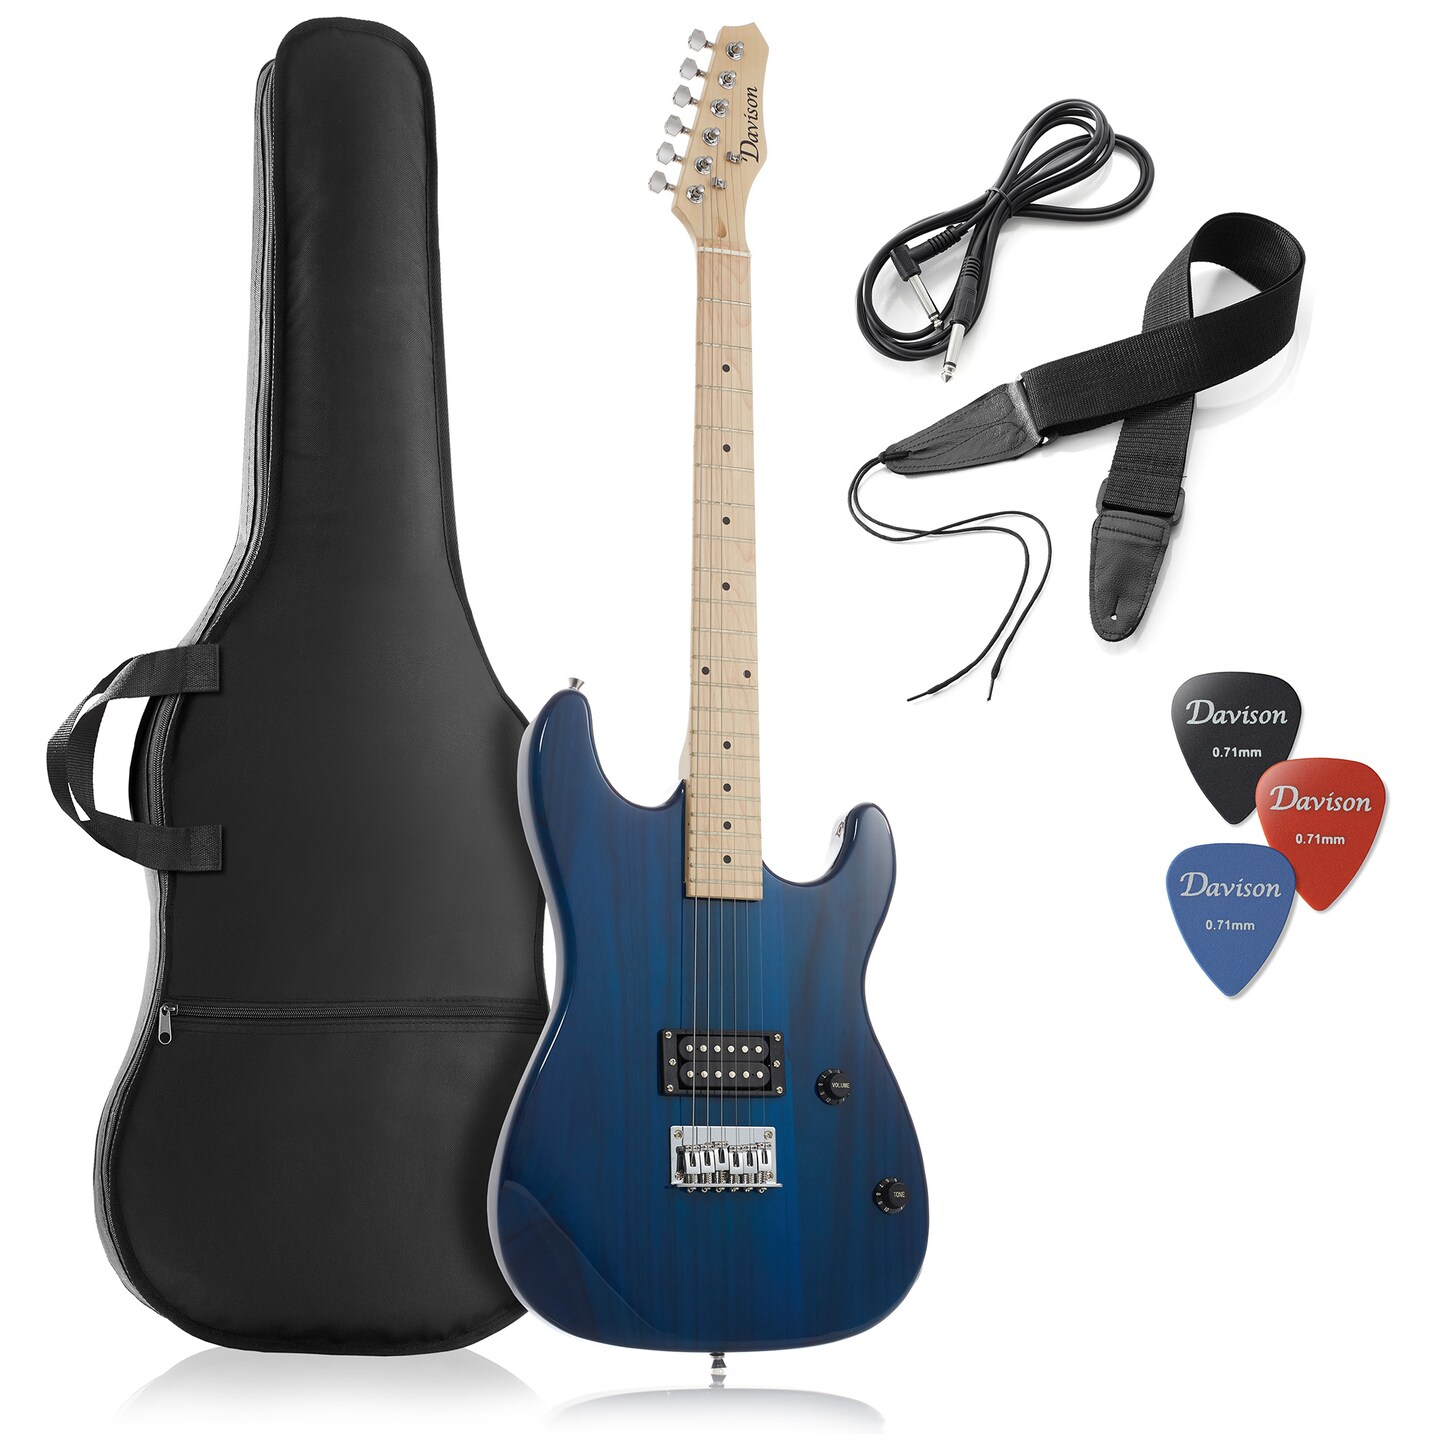 Davison Guitars 39" Full Size Electric Guitar - Right Handed Beginner Kit with Gig Bag and Accessories